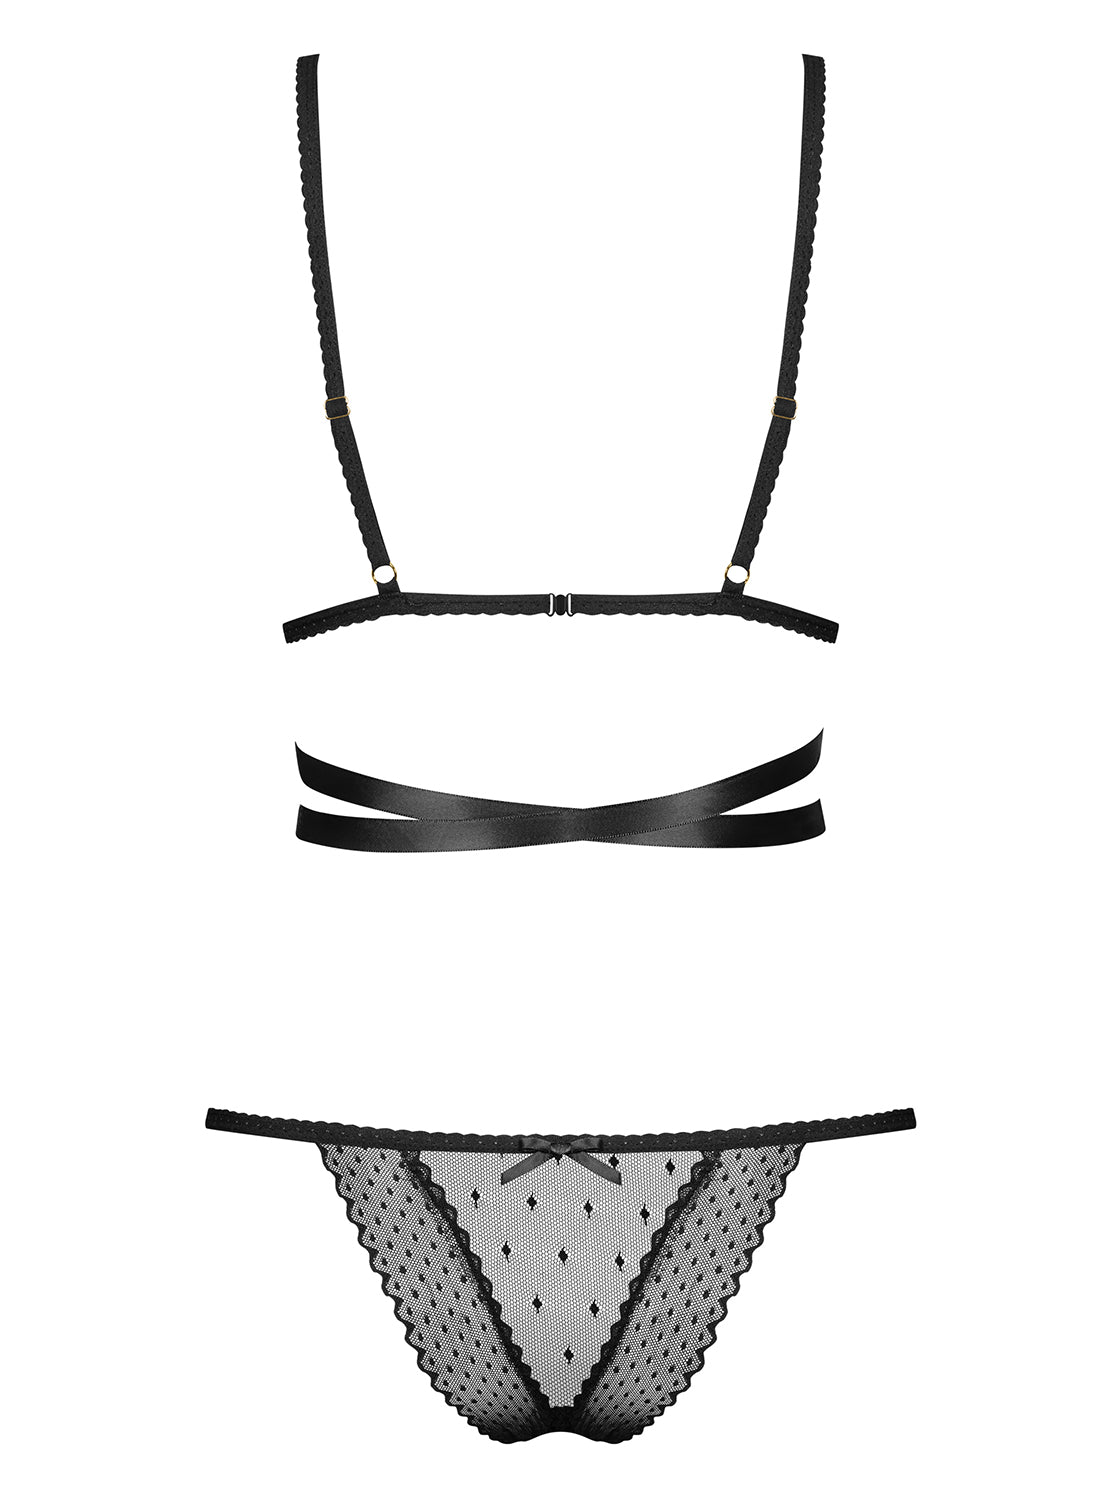 Bowessa Fantastic set made of transparent material in black with subtle dots and a satin lacing at the waist